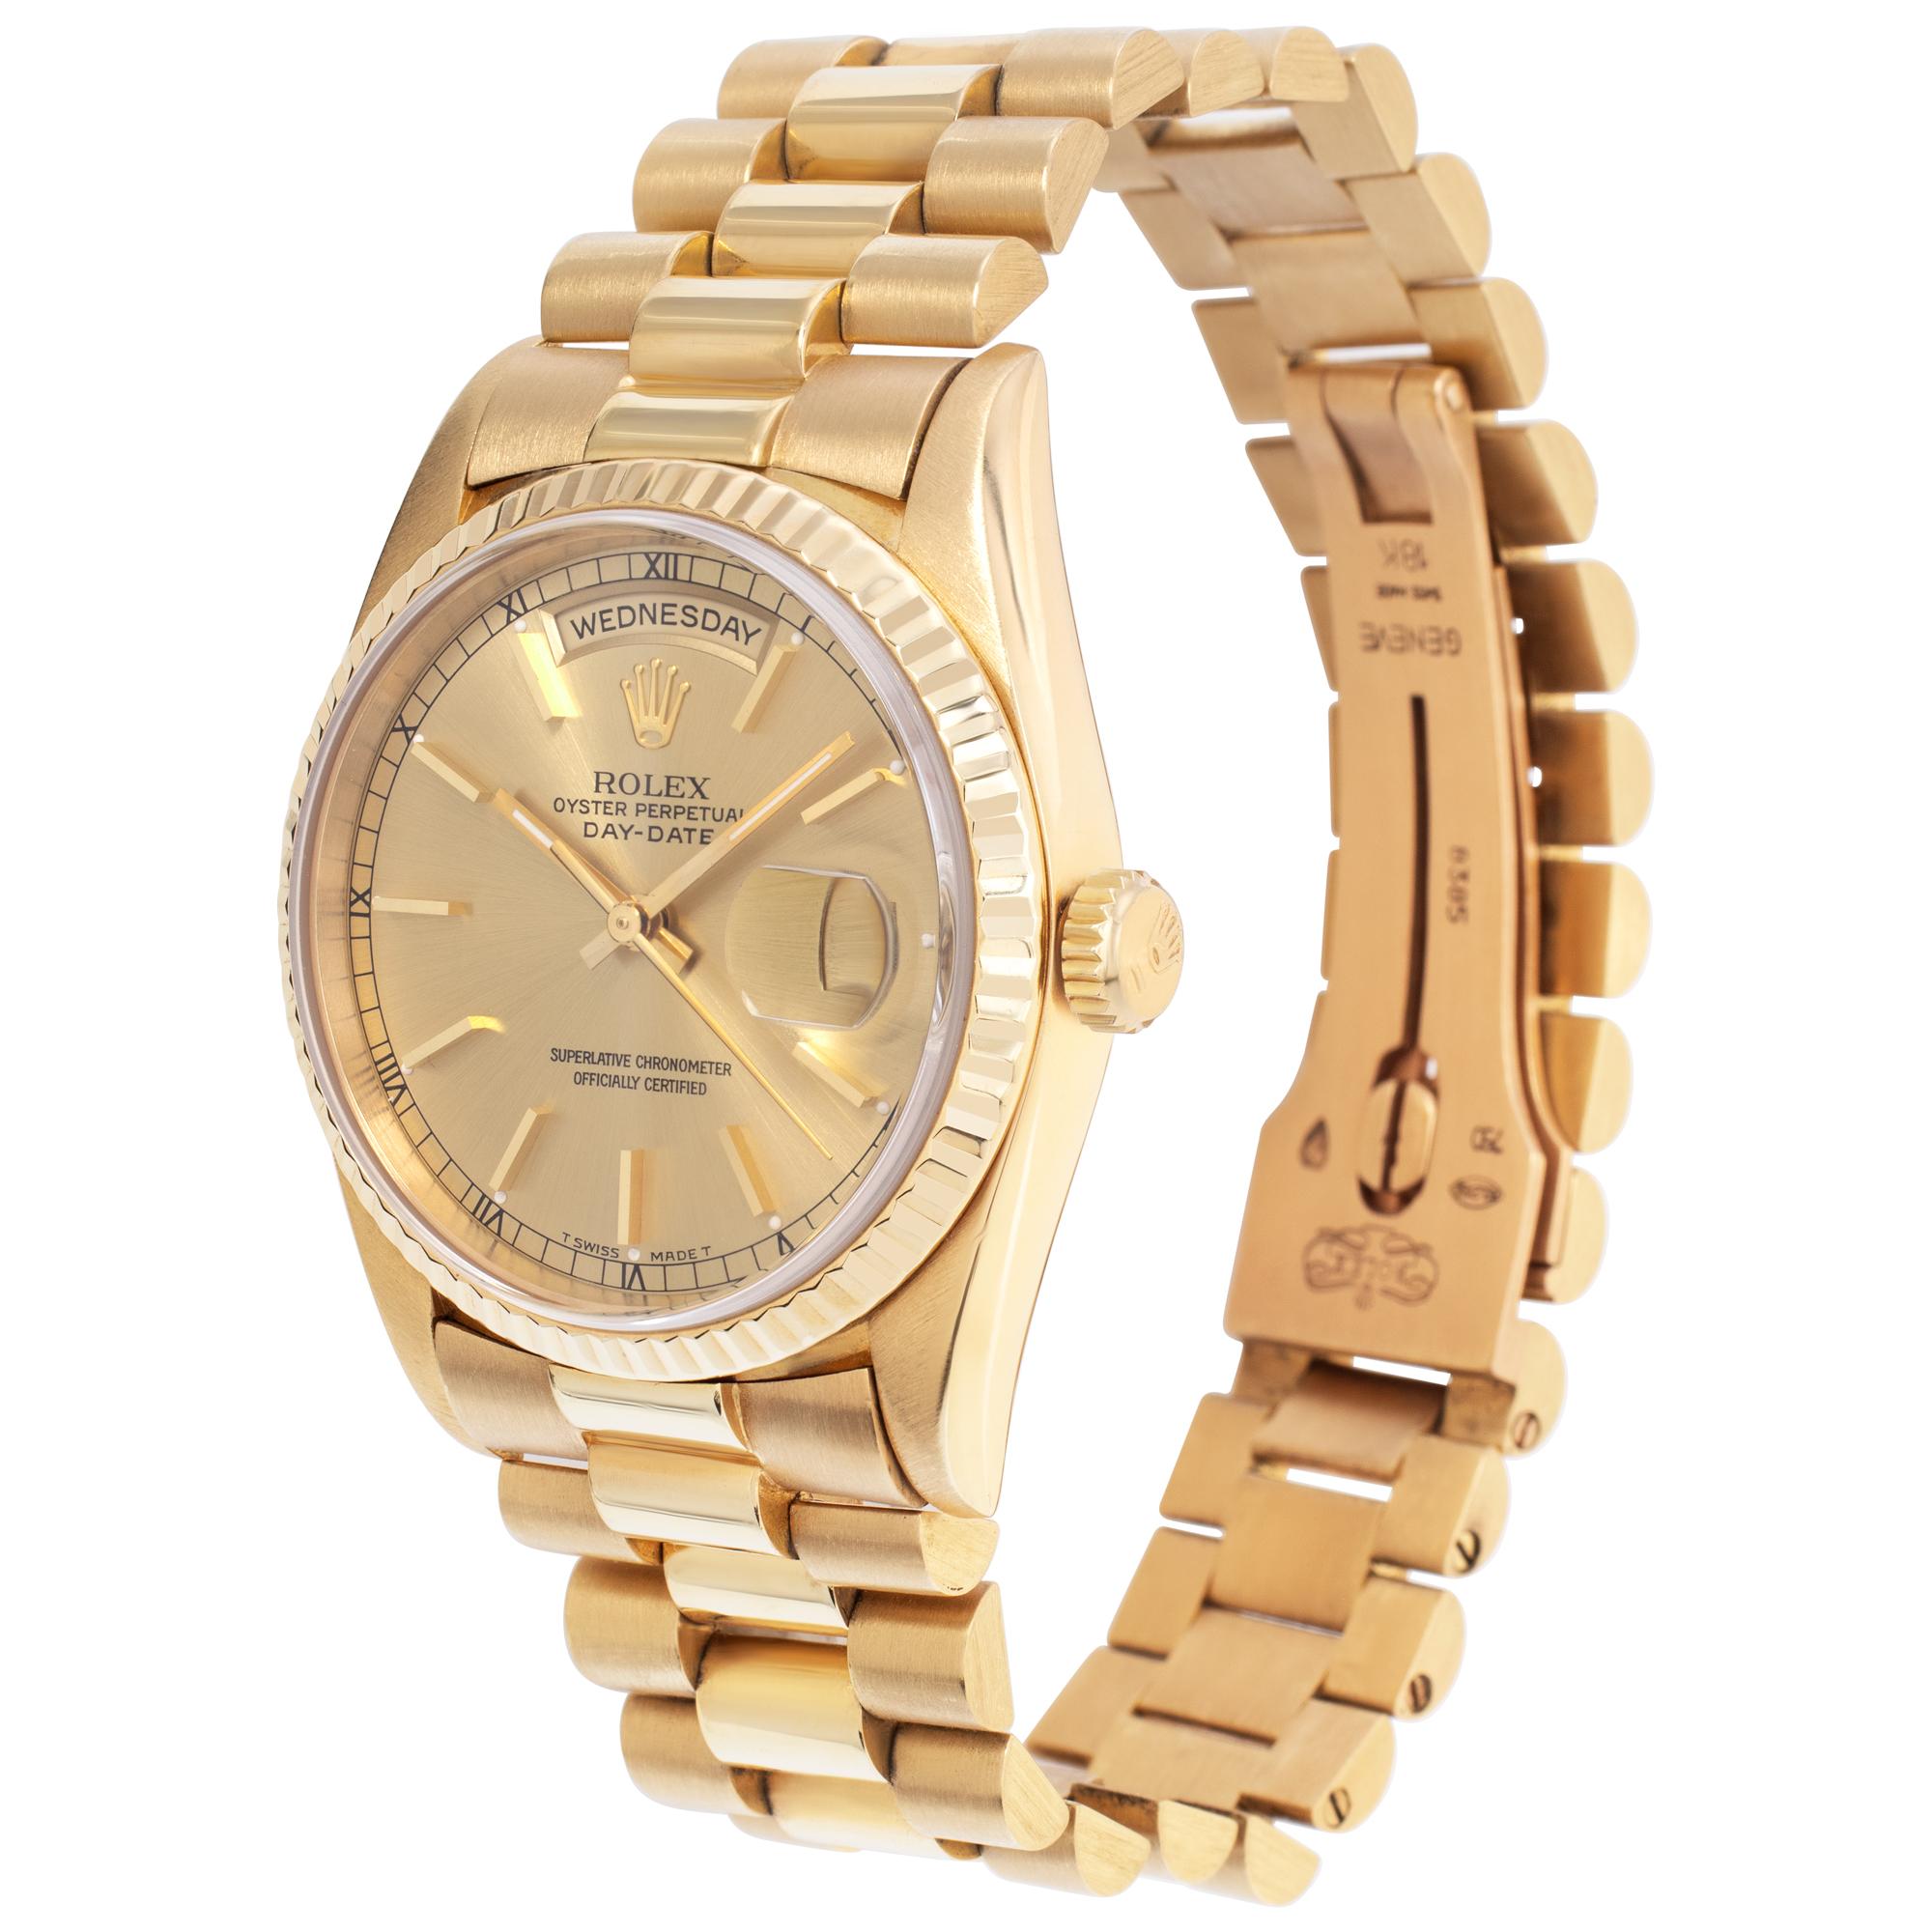 Rolex Day-Date in 18k. Auto w/ sweep seconds, date and day. 36 mm case size. **Bank wire only at this price** Ref 18238. Circa 1995. Fine Pre-owned Rolex Watch. Certified preowned Dress Rolex Day-Date 18238 watch is made out of yellow gold on a 18k